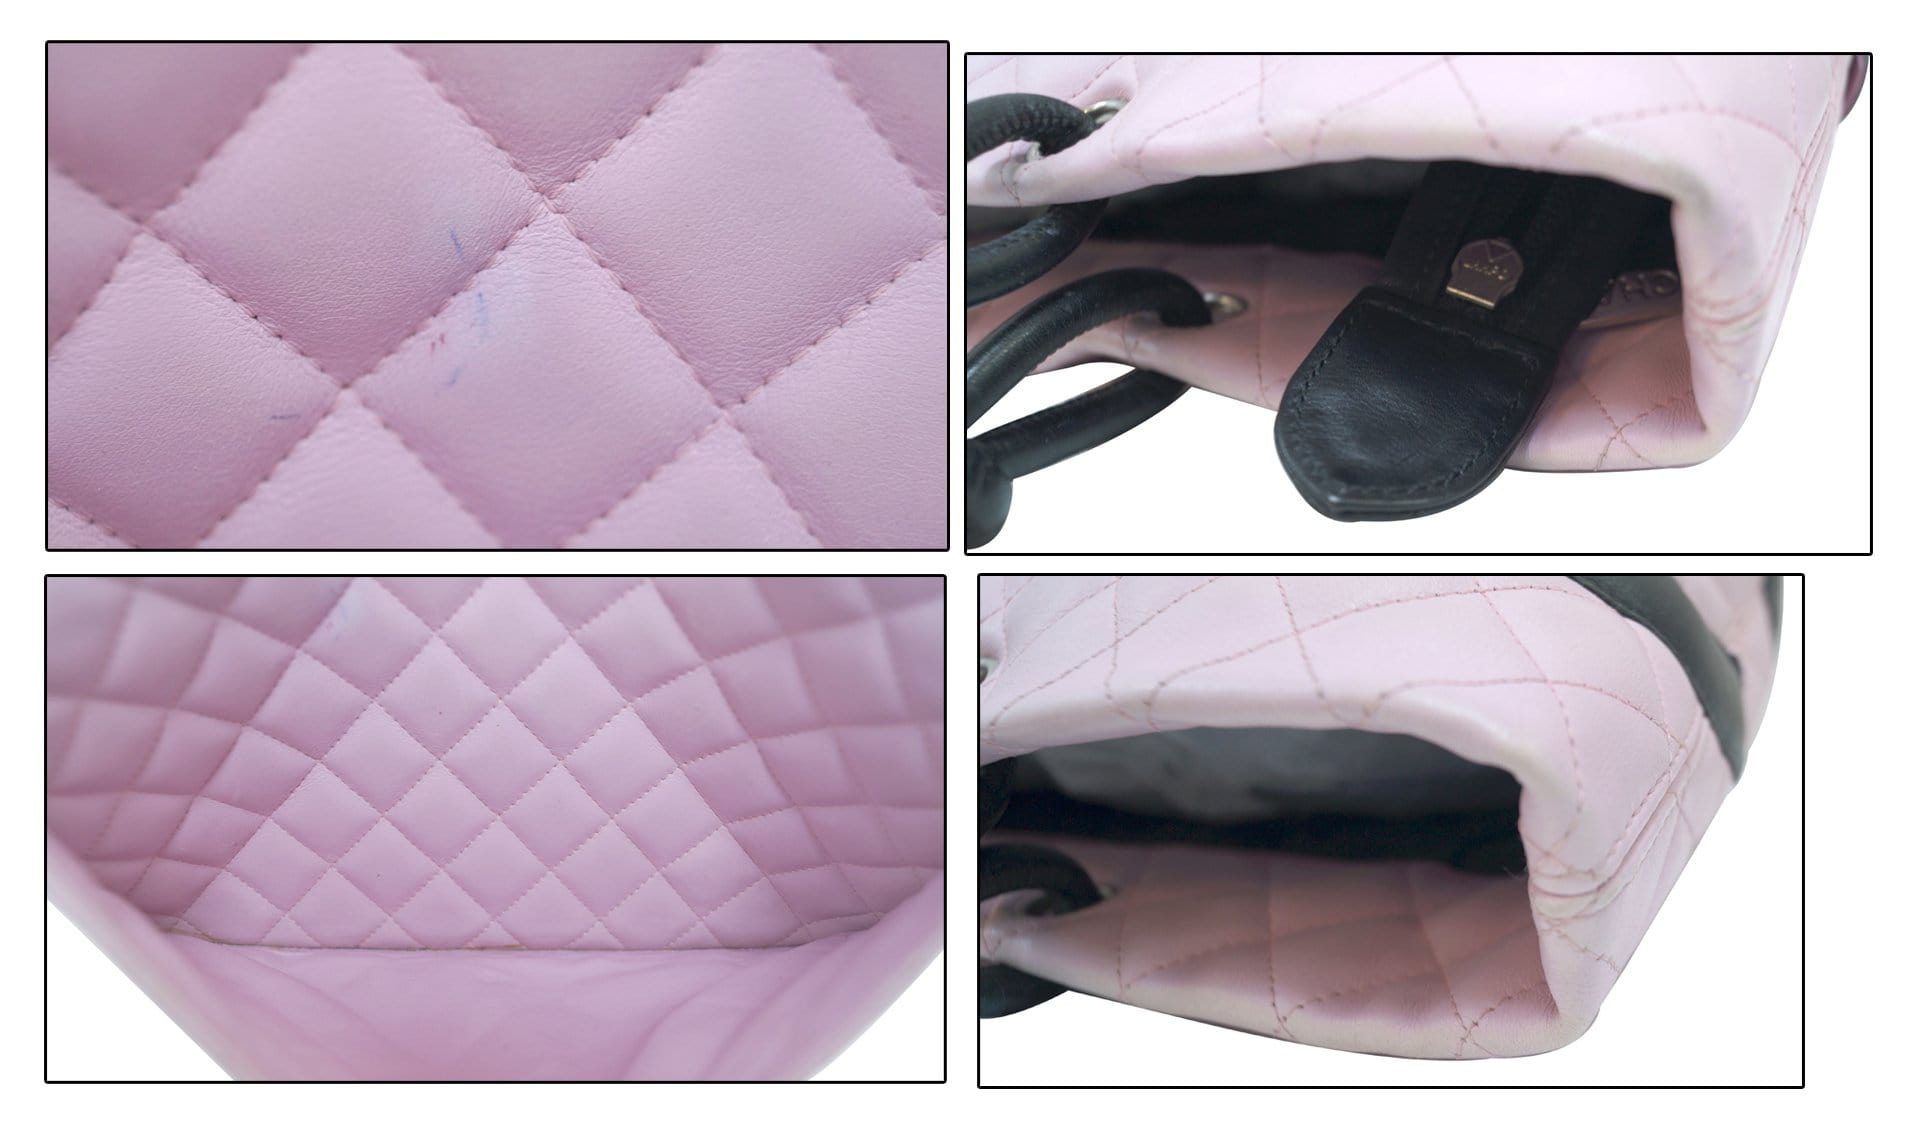 CHANEL PINK CAMBON QUILTED LEATHER BAG – RDB